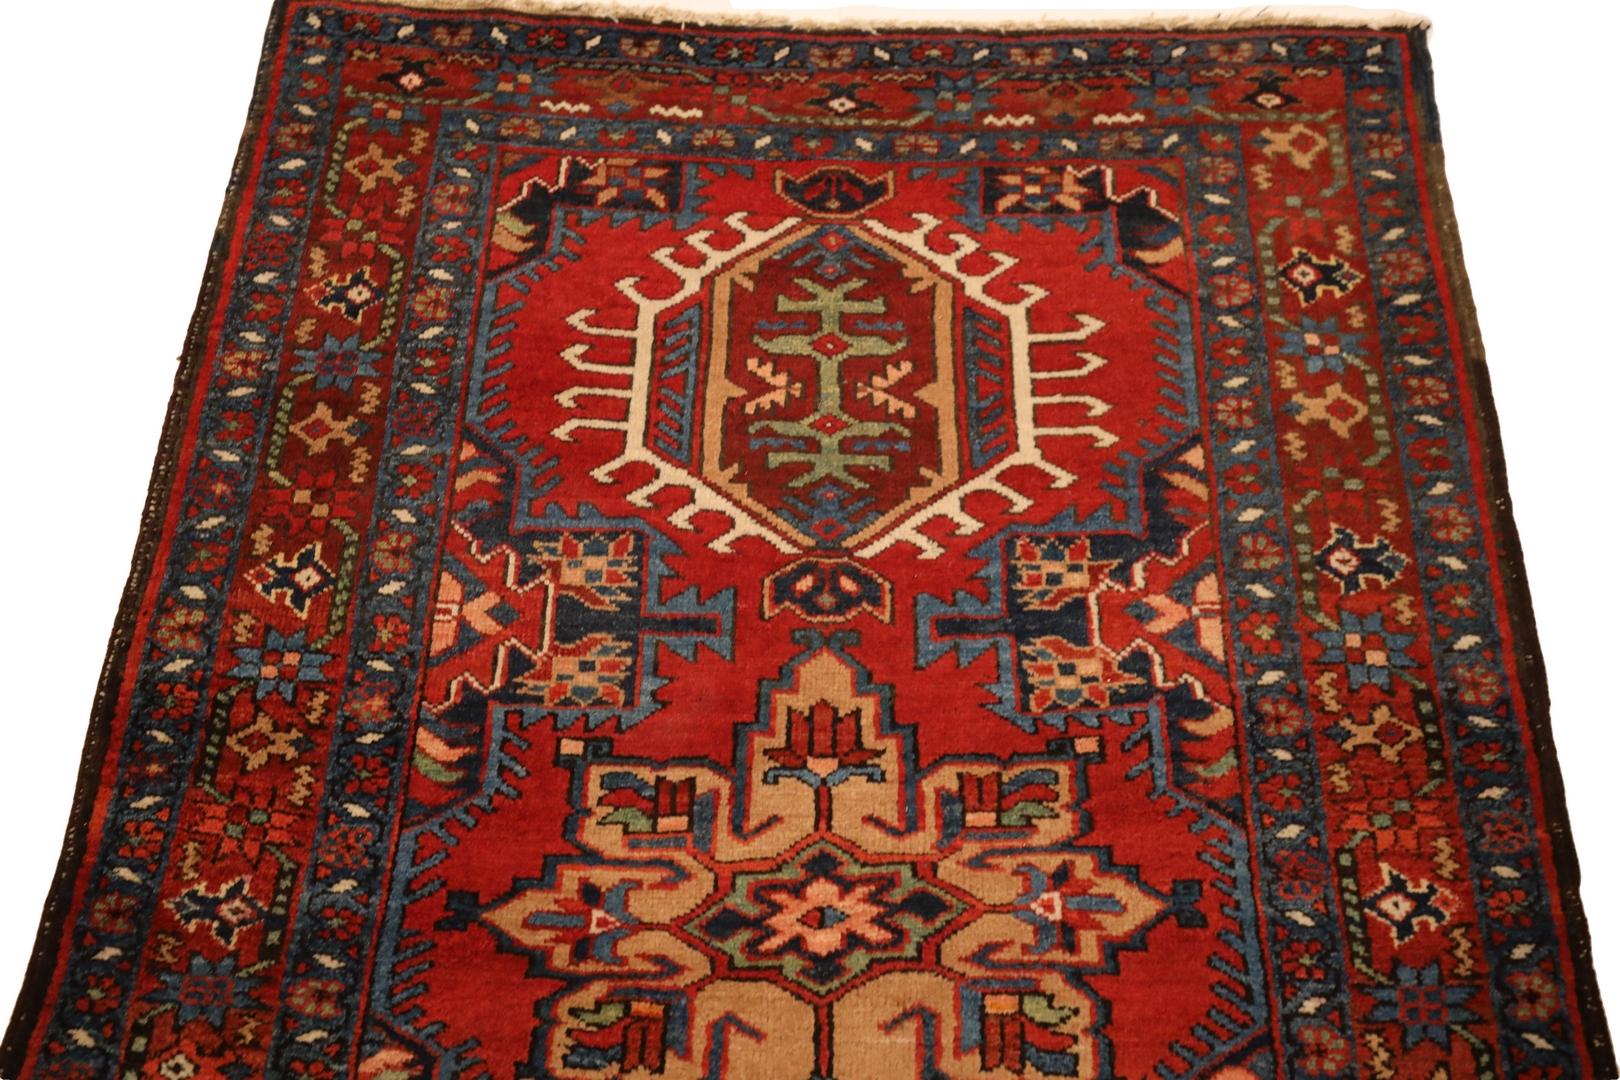 Hand-Knotted N.W. Persian Semi-Antique rug, Red Beige Sea-Green - 3'2